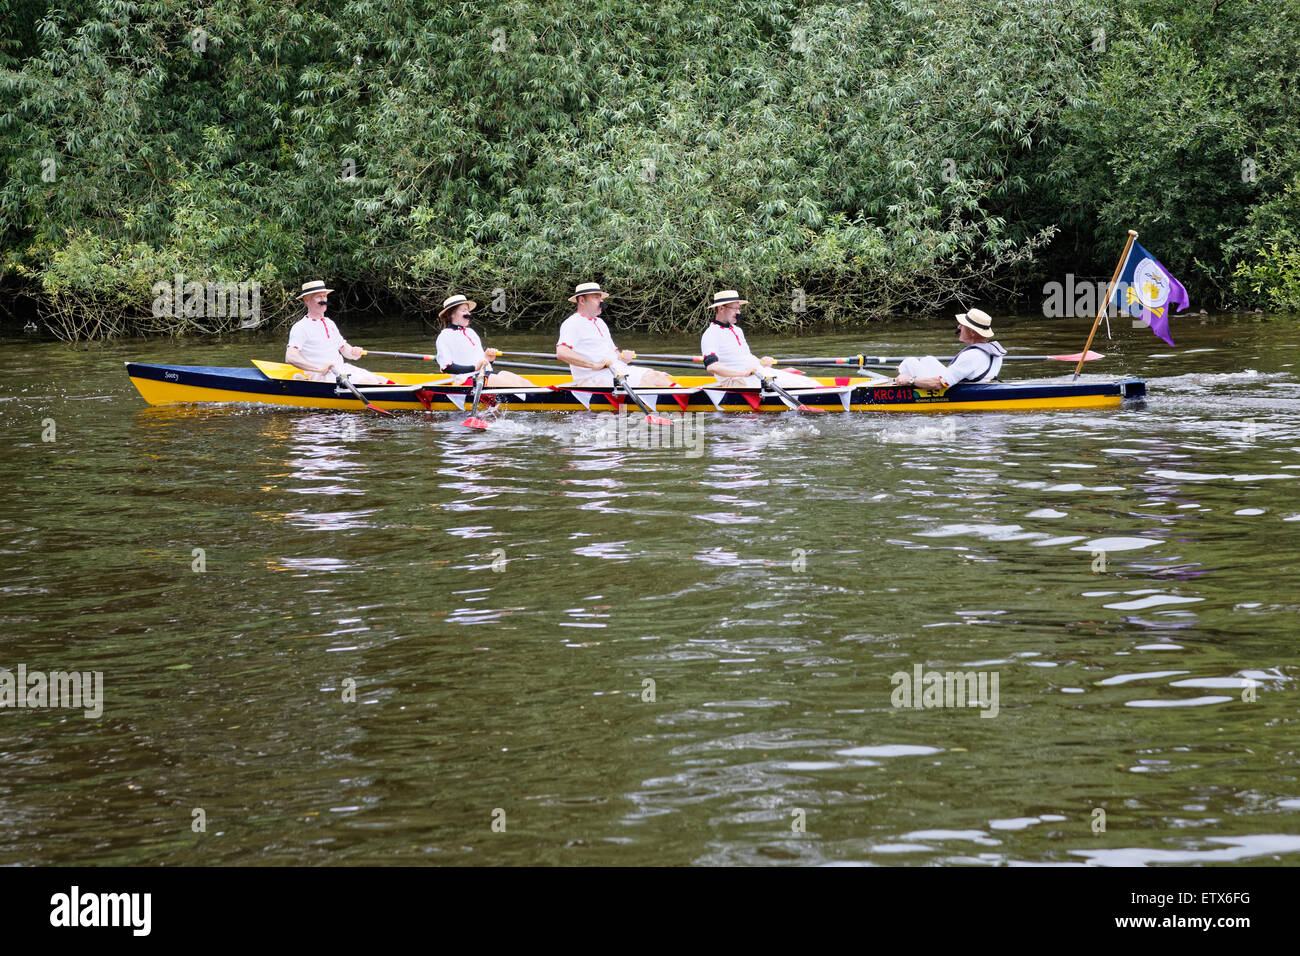 On the River Thames at Runnymede, Sooty a scull crewed by mustached rowers works its way upstream Stock Photo